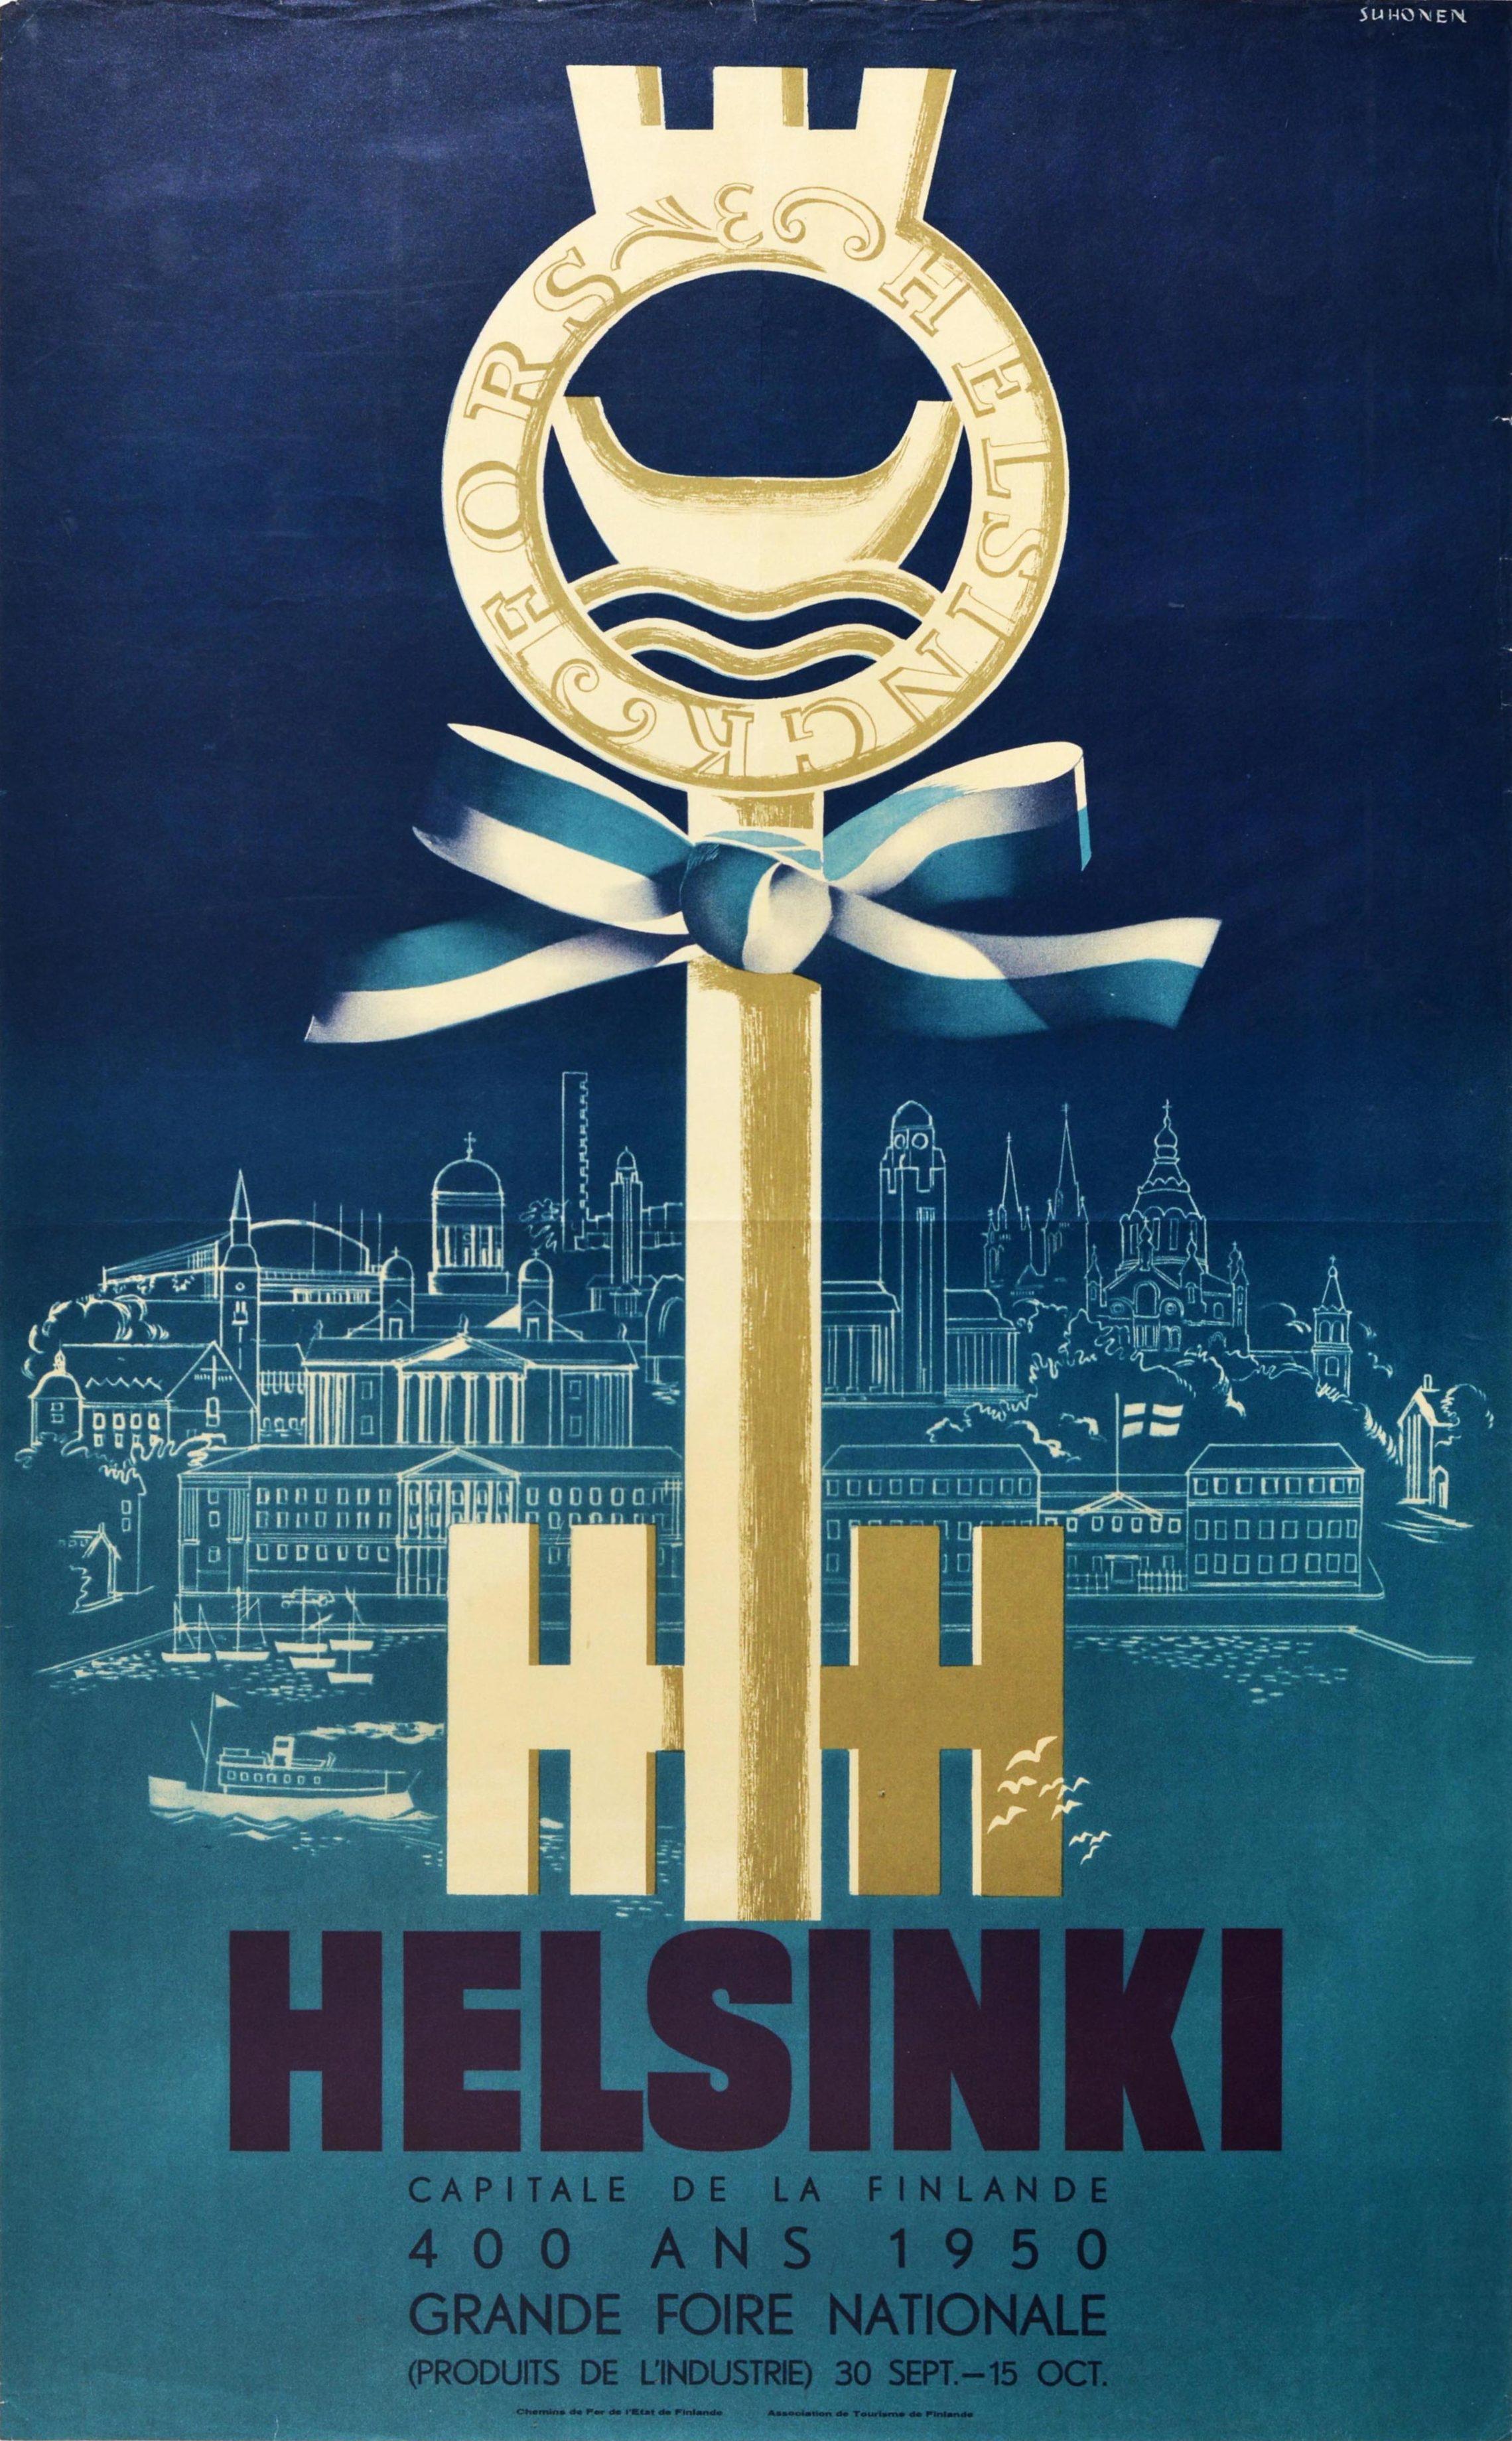 Original vintage travel poster promoting Helsinki Finland featuring a great illustration showing a key to the capital city with Fors Helsingk and a boat depicted at the top of the key, and a blue and white ribbon in the colours of Finnish flag tied